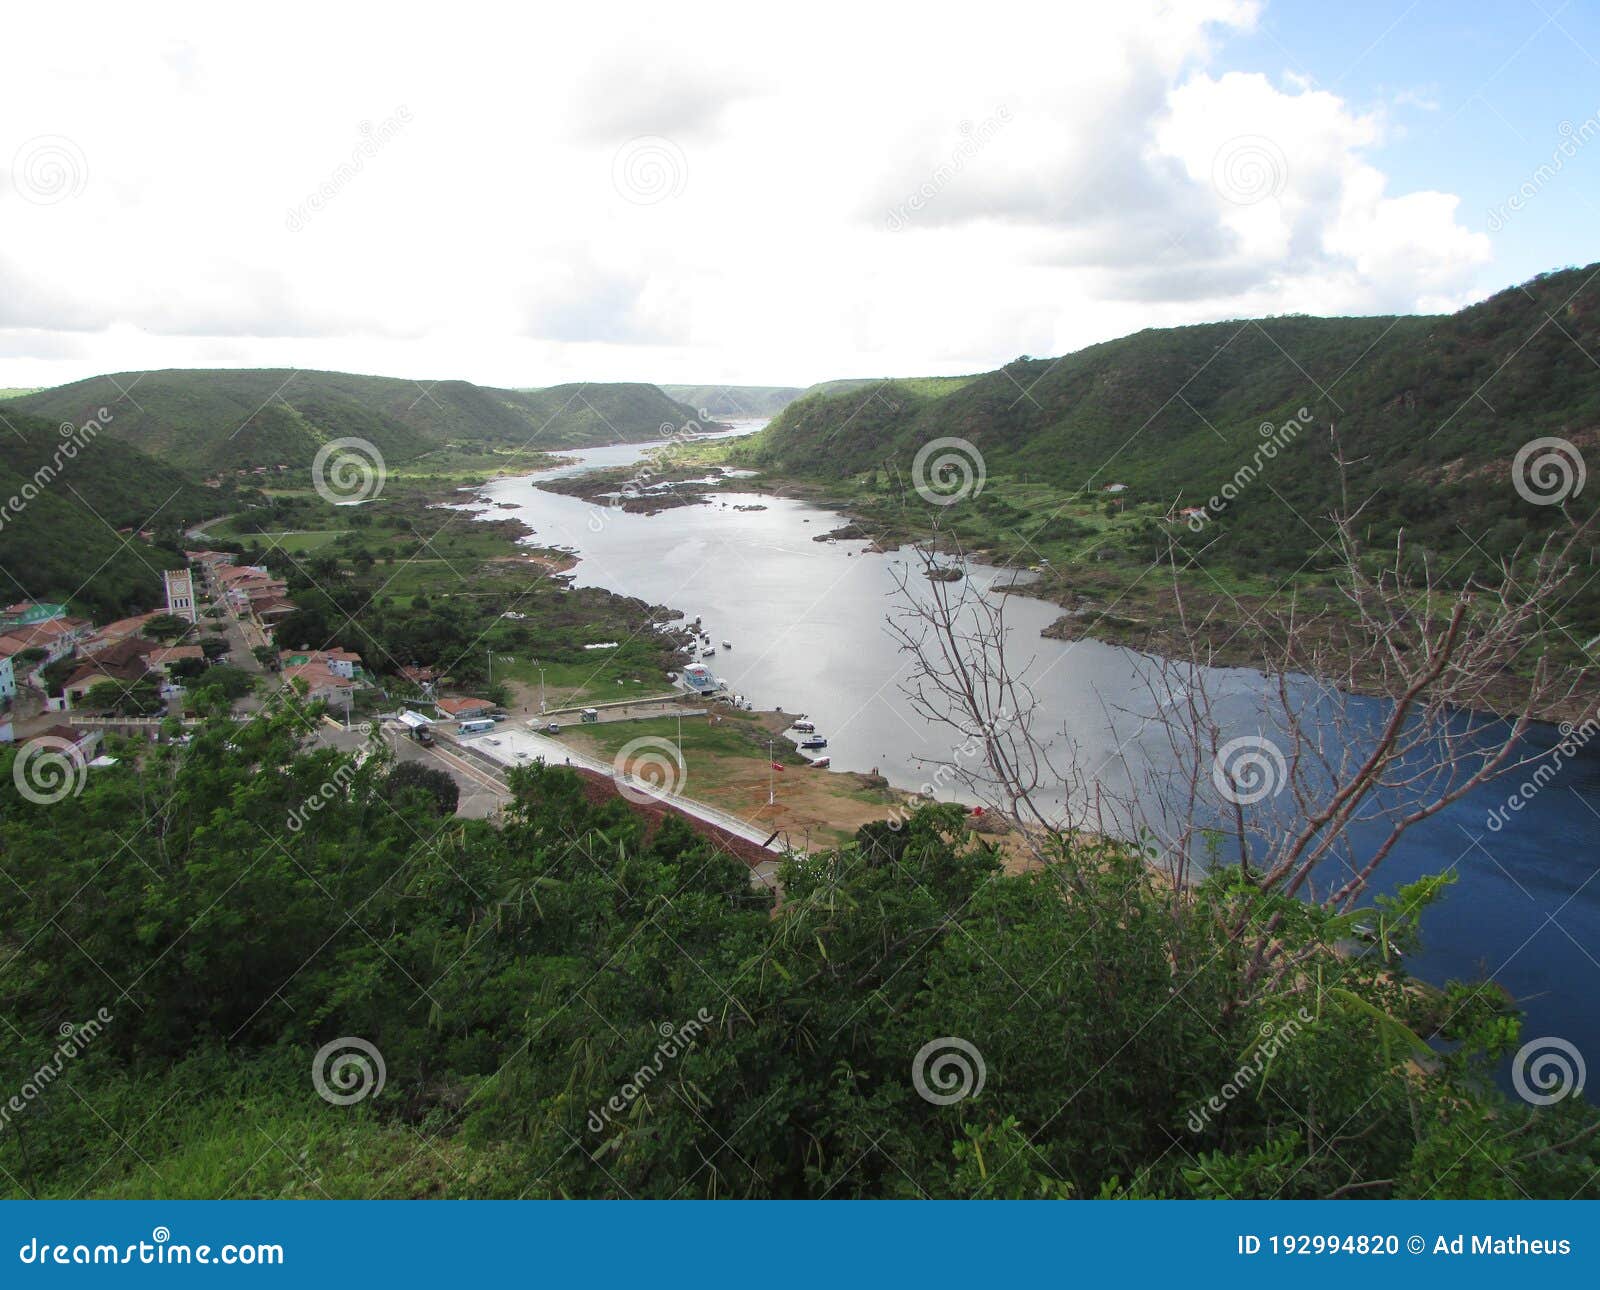 immensity of the sÃÂ£o francisco river between the states of sergipe and alagoas